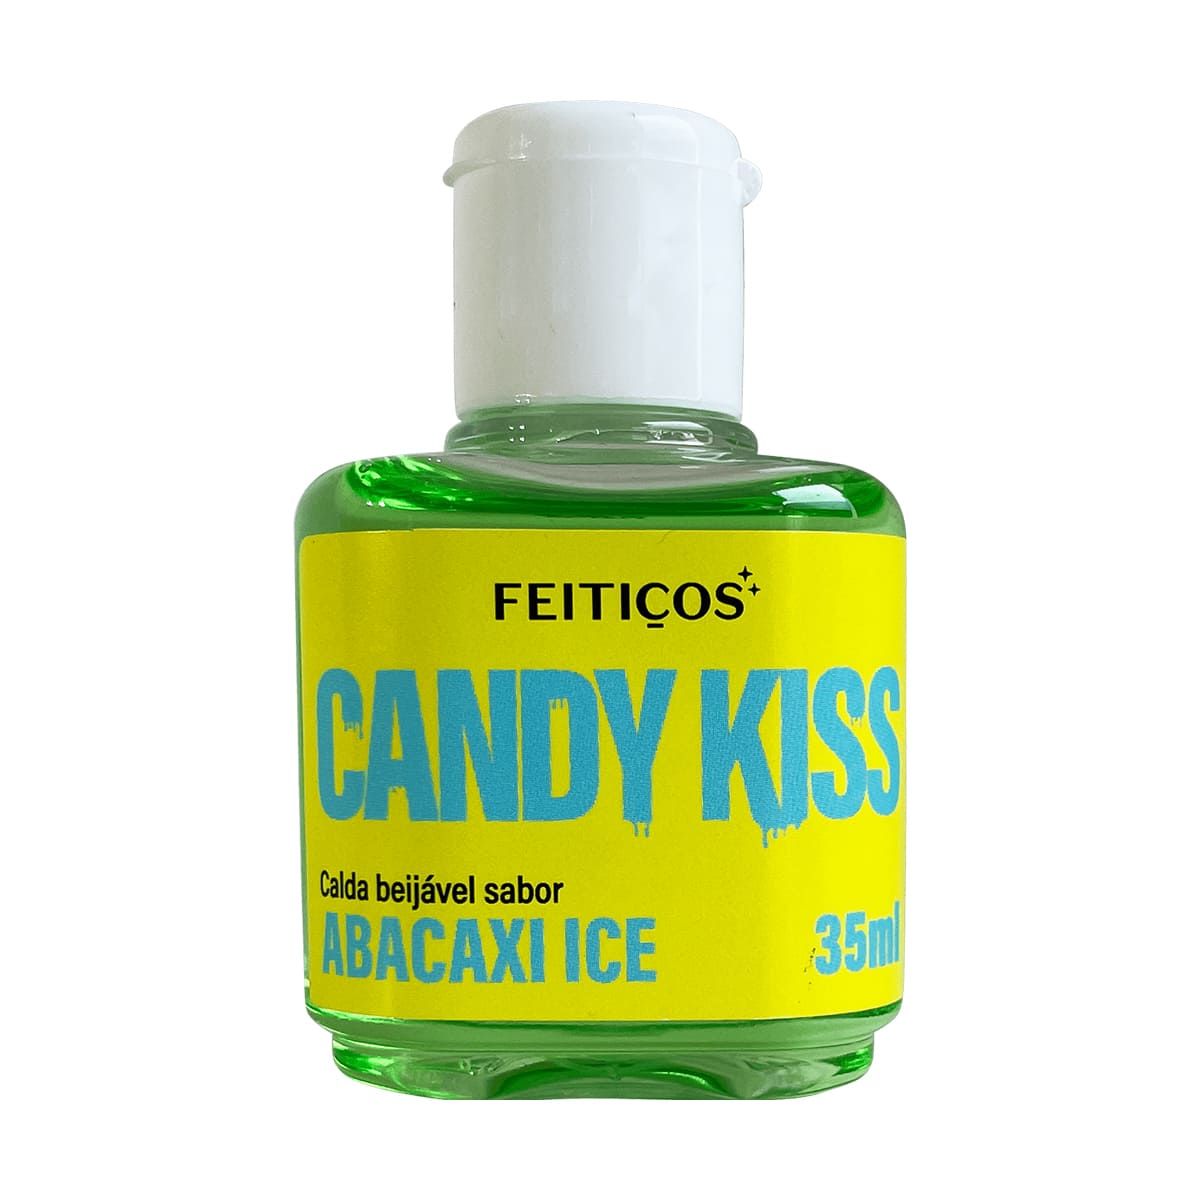 Candy Kiss - Abacaxi Ice - 35ml